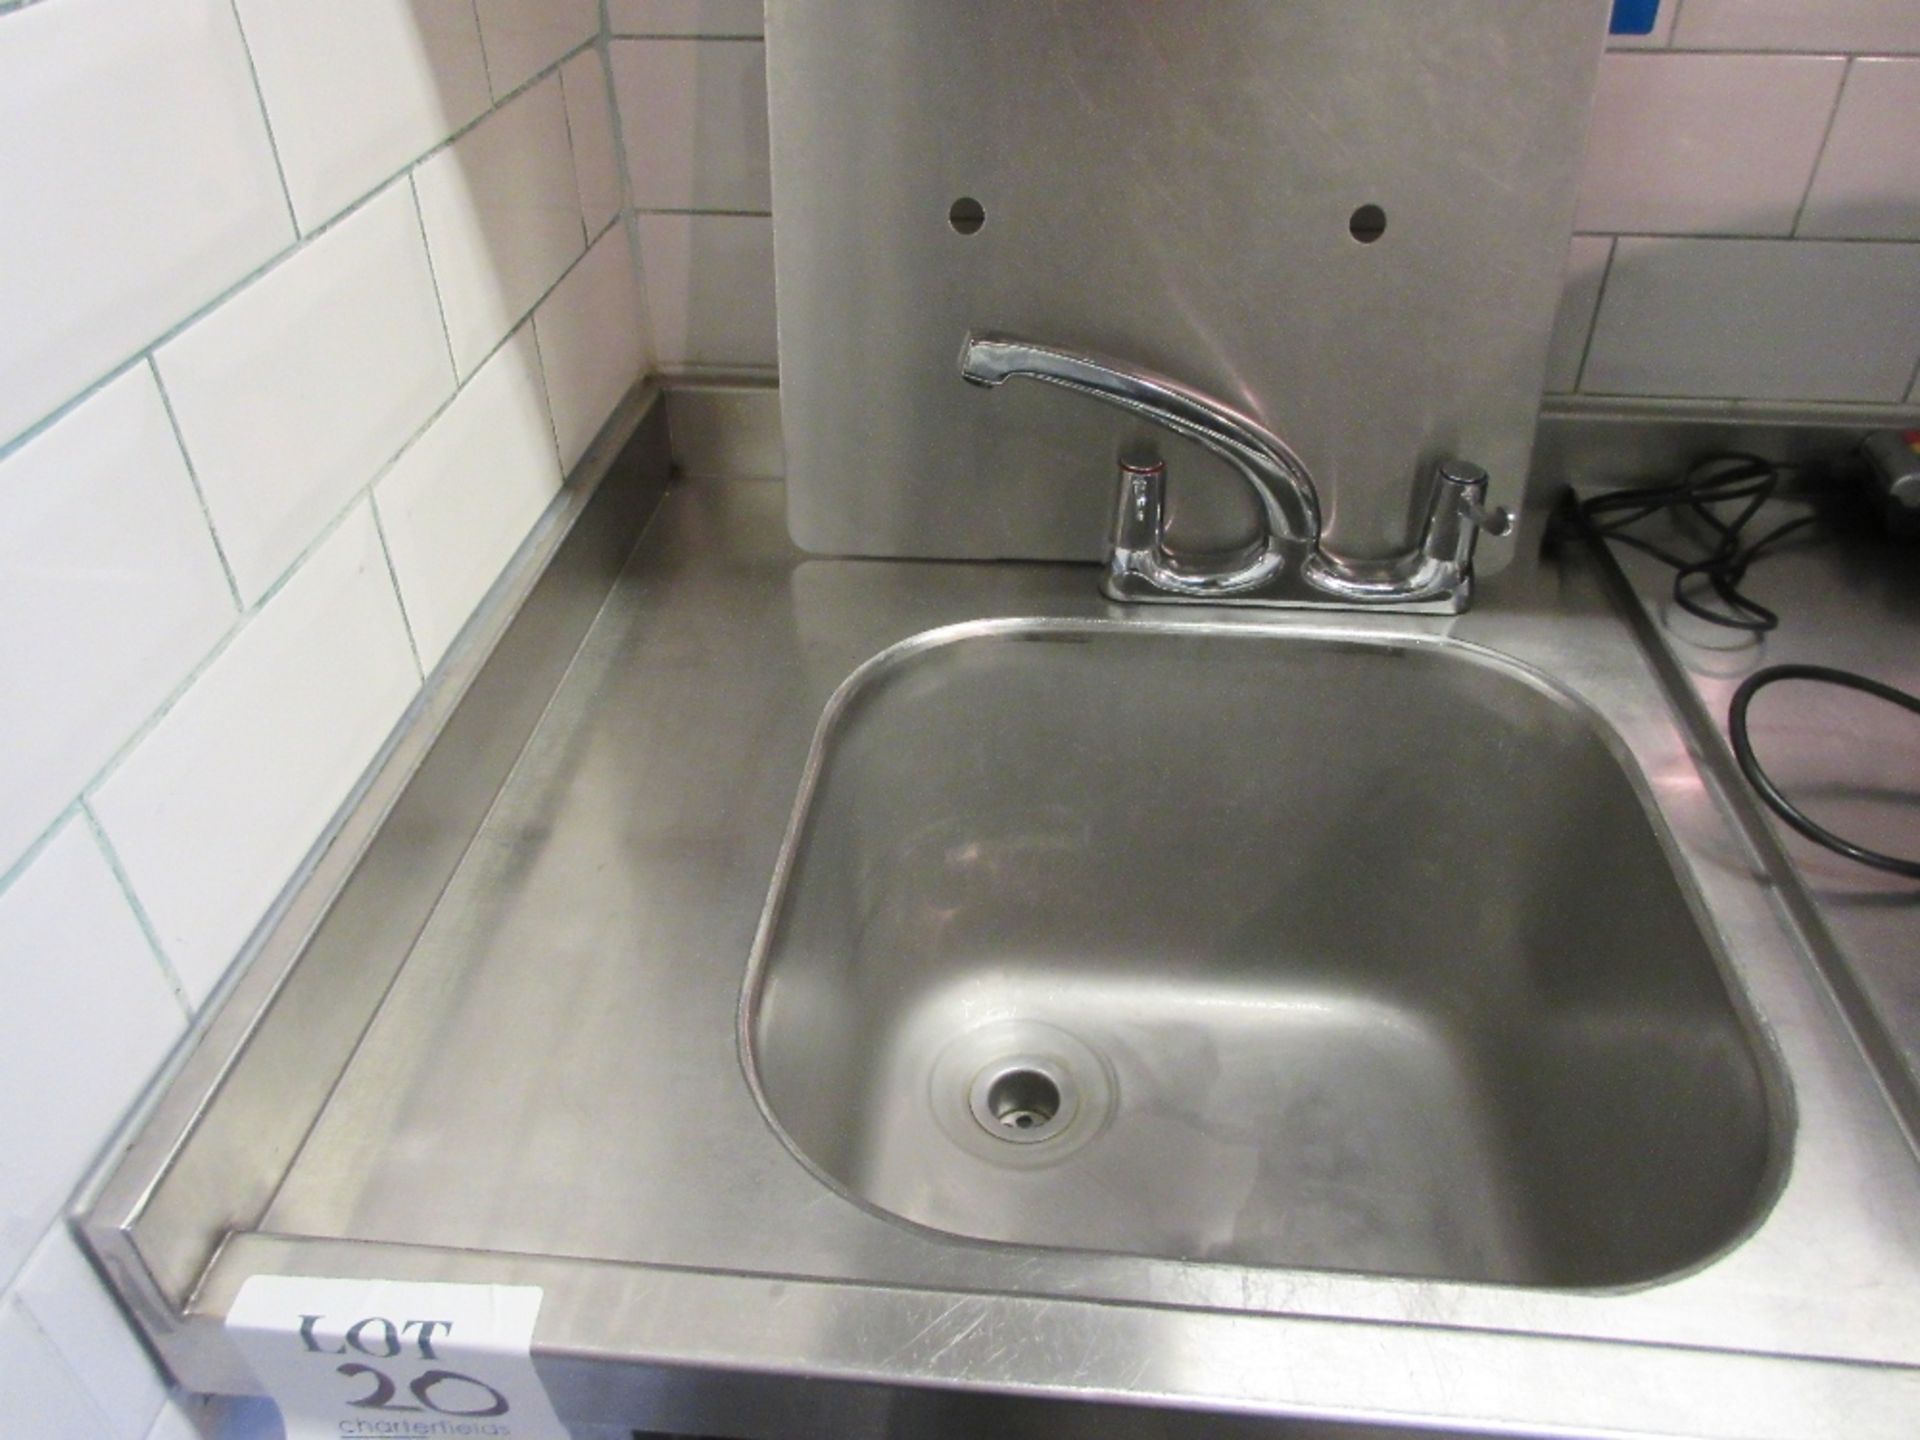 Stainless steel single bowl basin incorporating mixer tap, worktop 227cm x 66cm approx, with shelf - Image 4 of 4